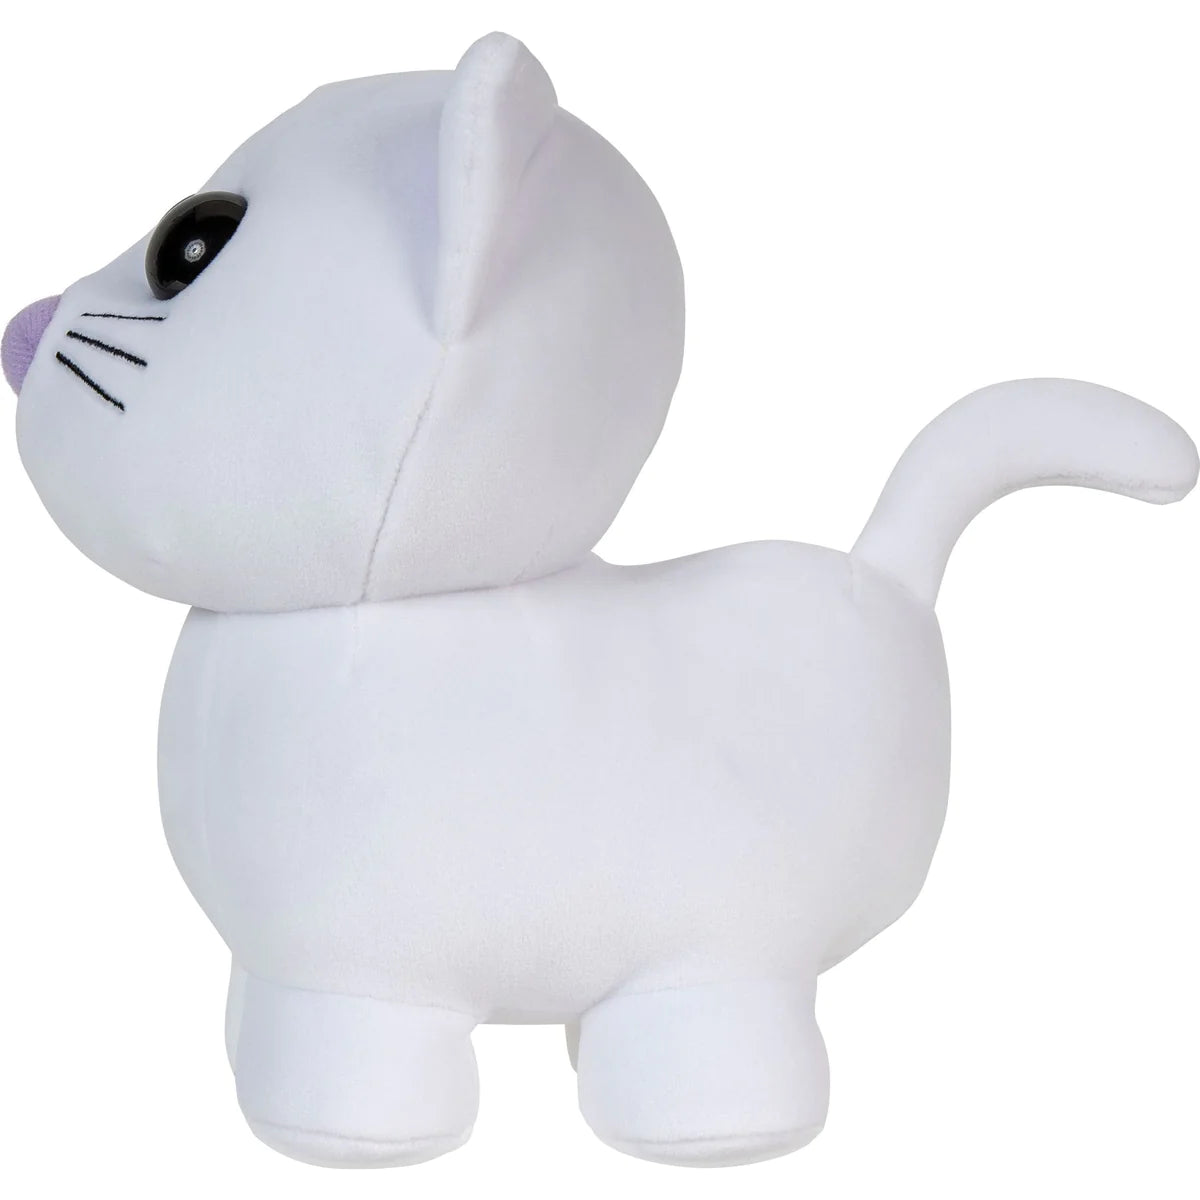 Adopt Me Series 2 Snow Cat 8 Inch Collector Plush Soft Toy